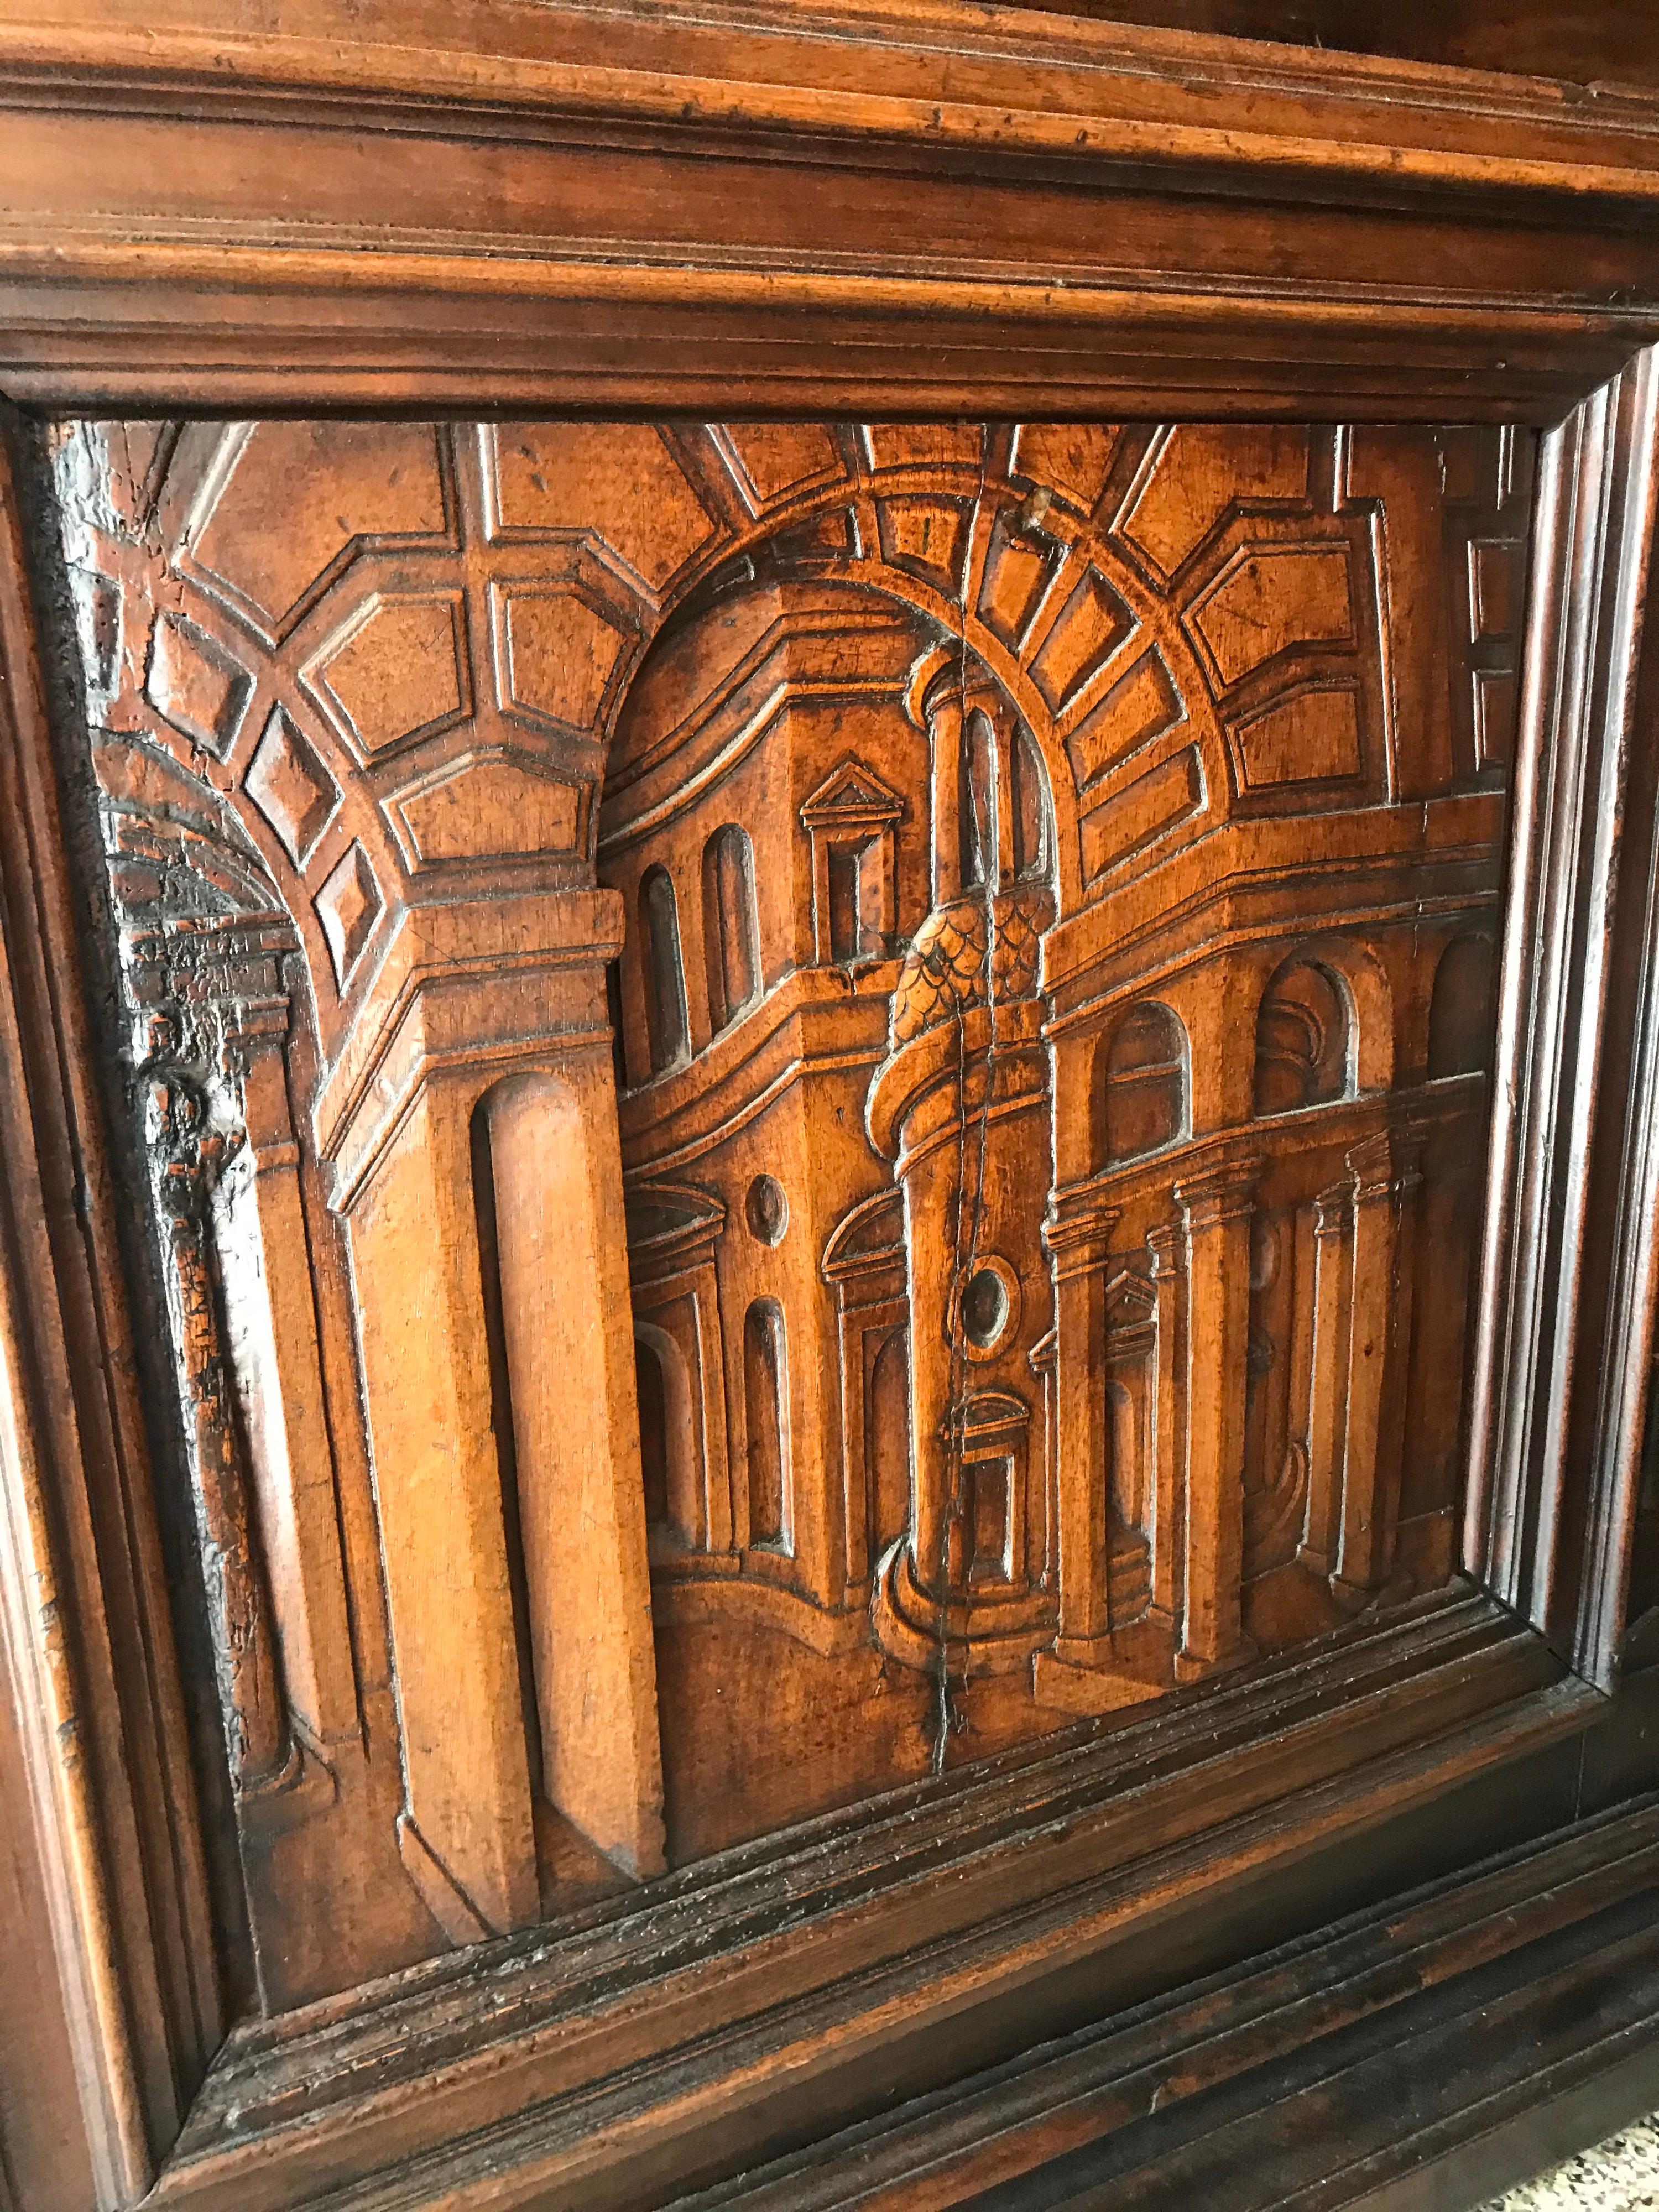 18th Century Italian Carved Walnut Cupboard with Italian Scenes Carved in Doors 2